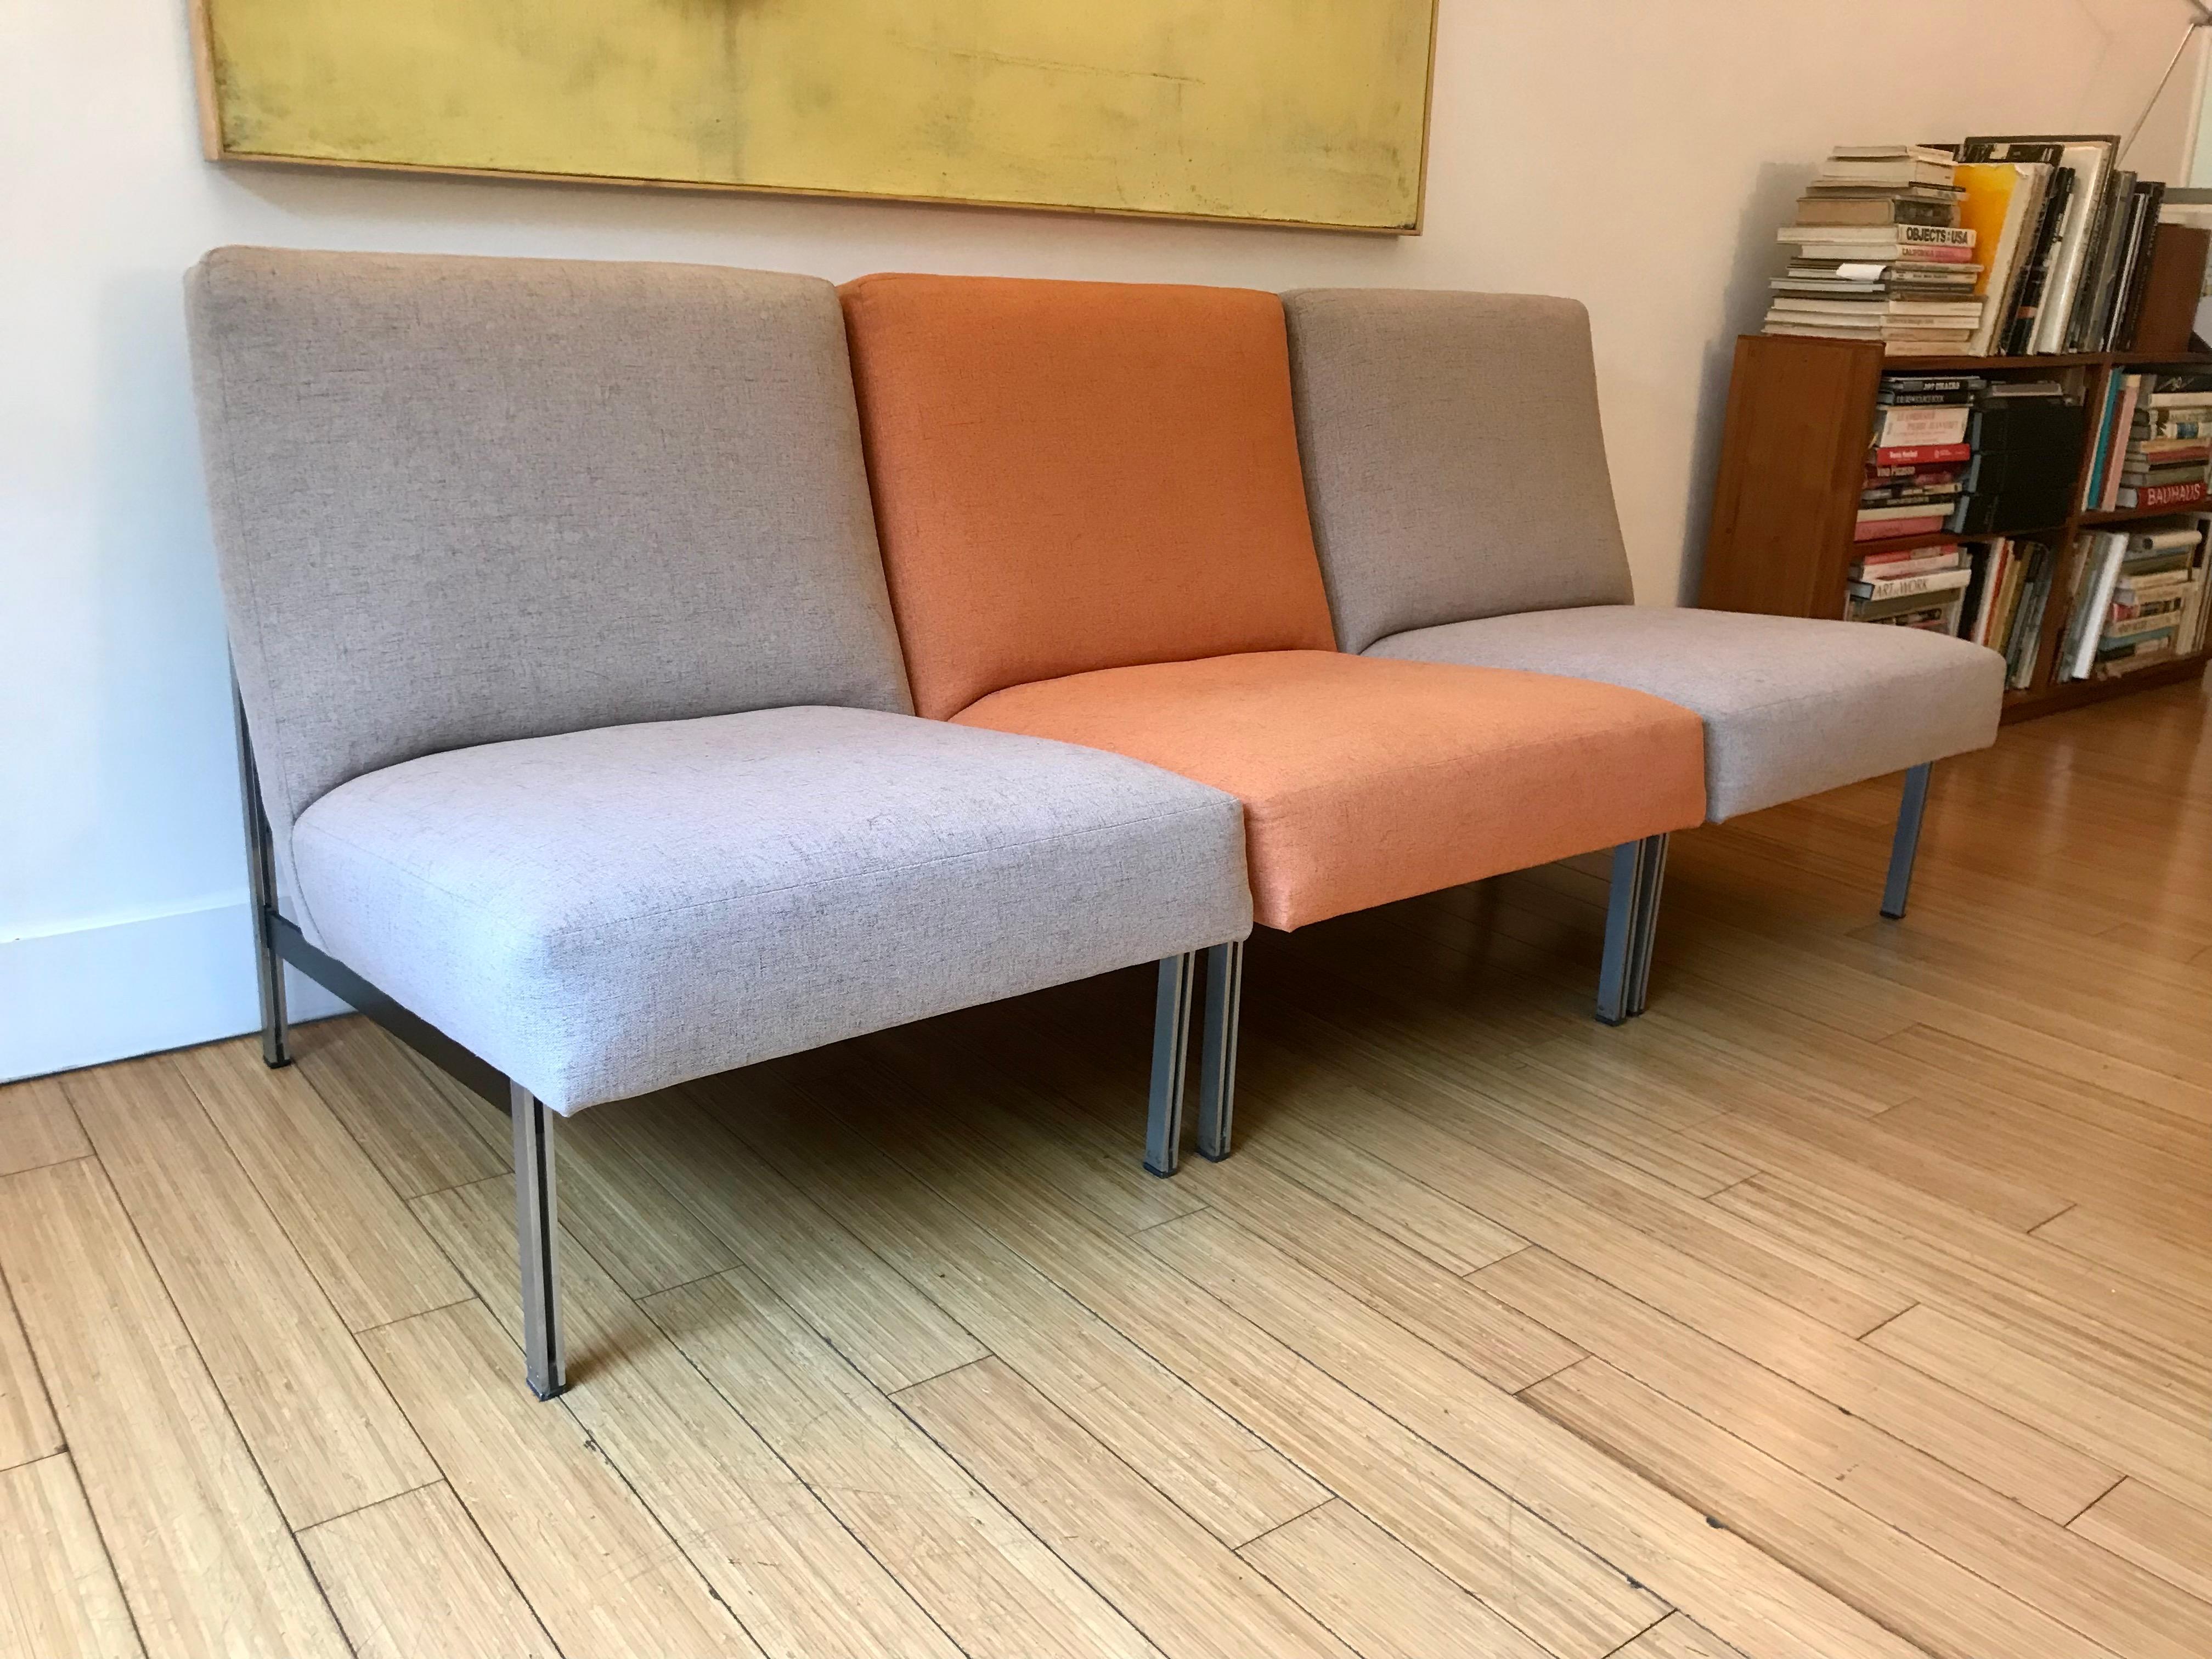 20th Century Florence Knoll Parallel Bar Modular Seating System